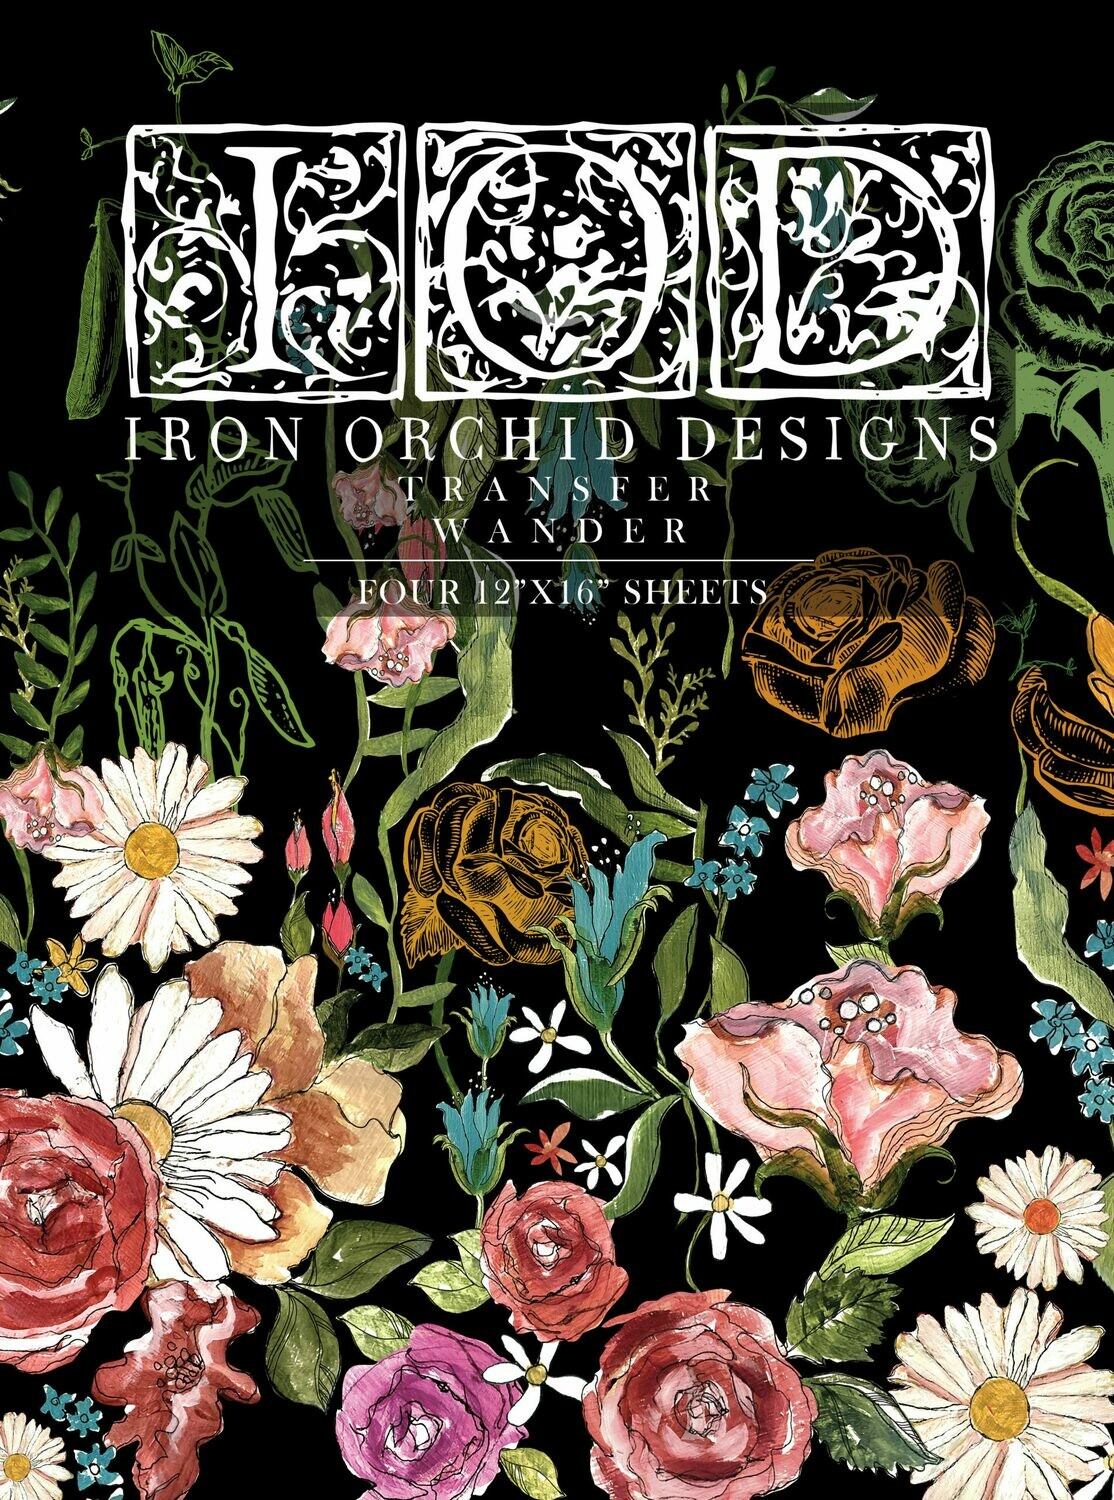 WANDER TRANSFER by IOD - Iron Orchid Designs